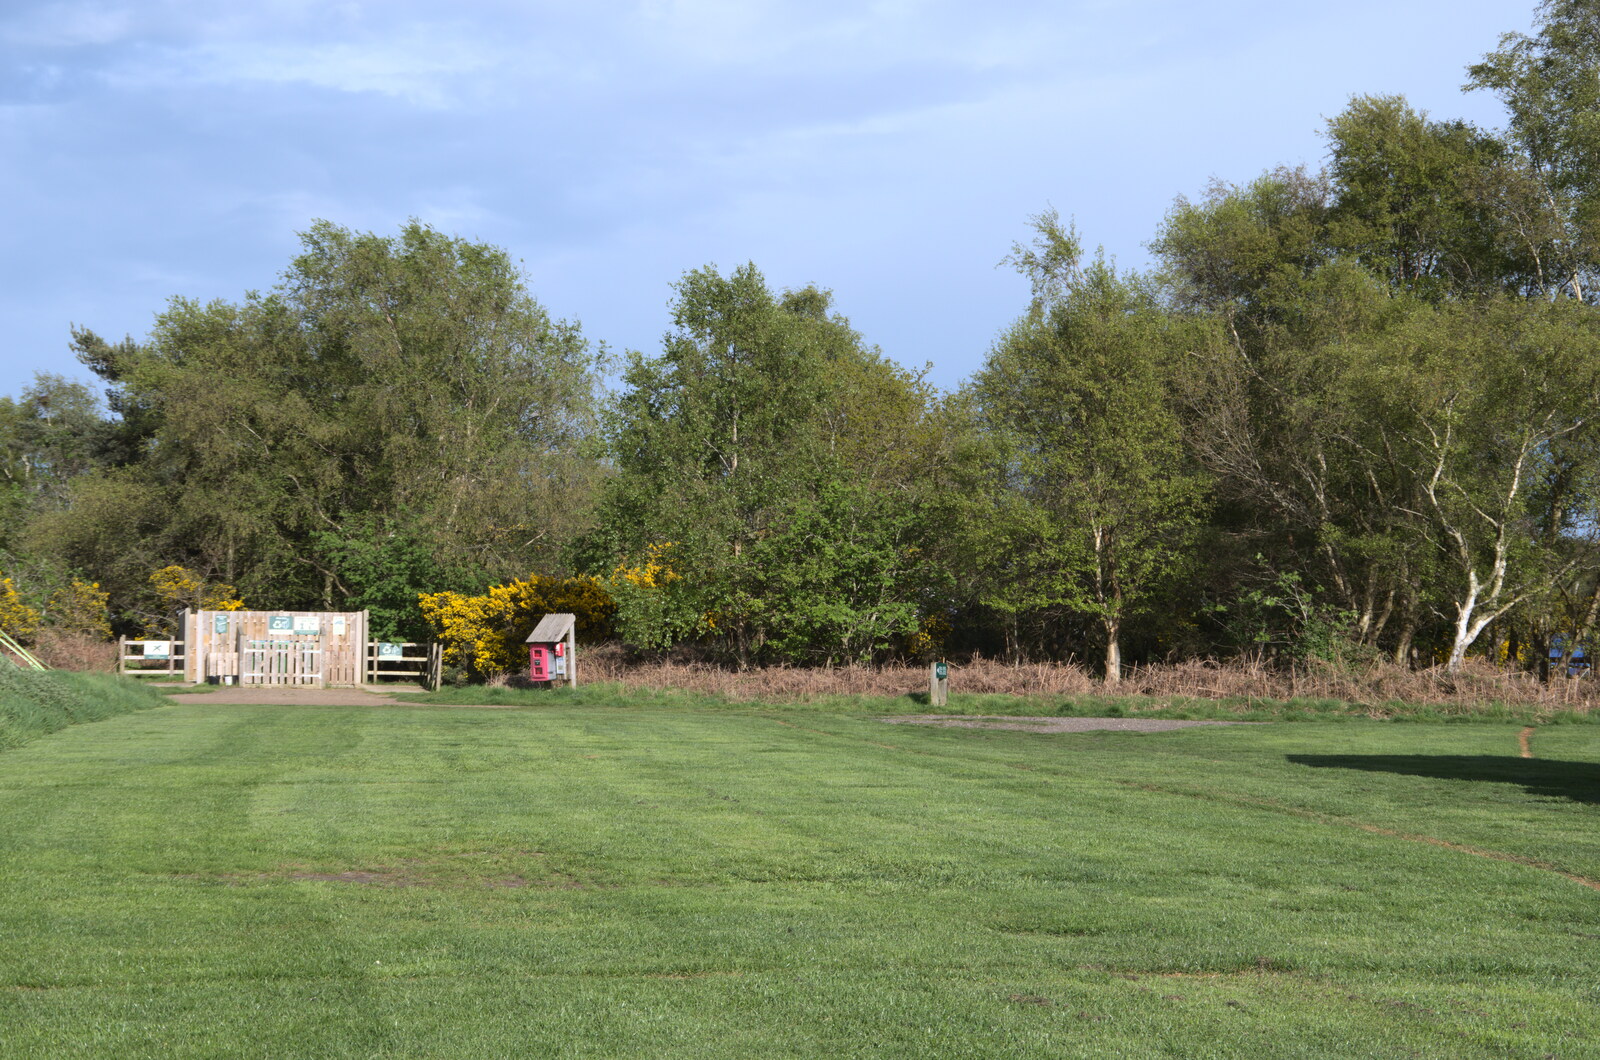 Our bit of campsite, before it fills up from A Coronation Camping Picnic, Kelling Heath, Norfolk - 6th May 2023